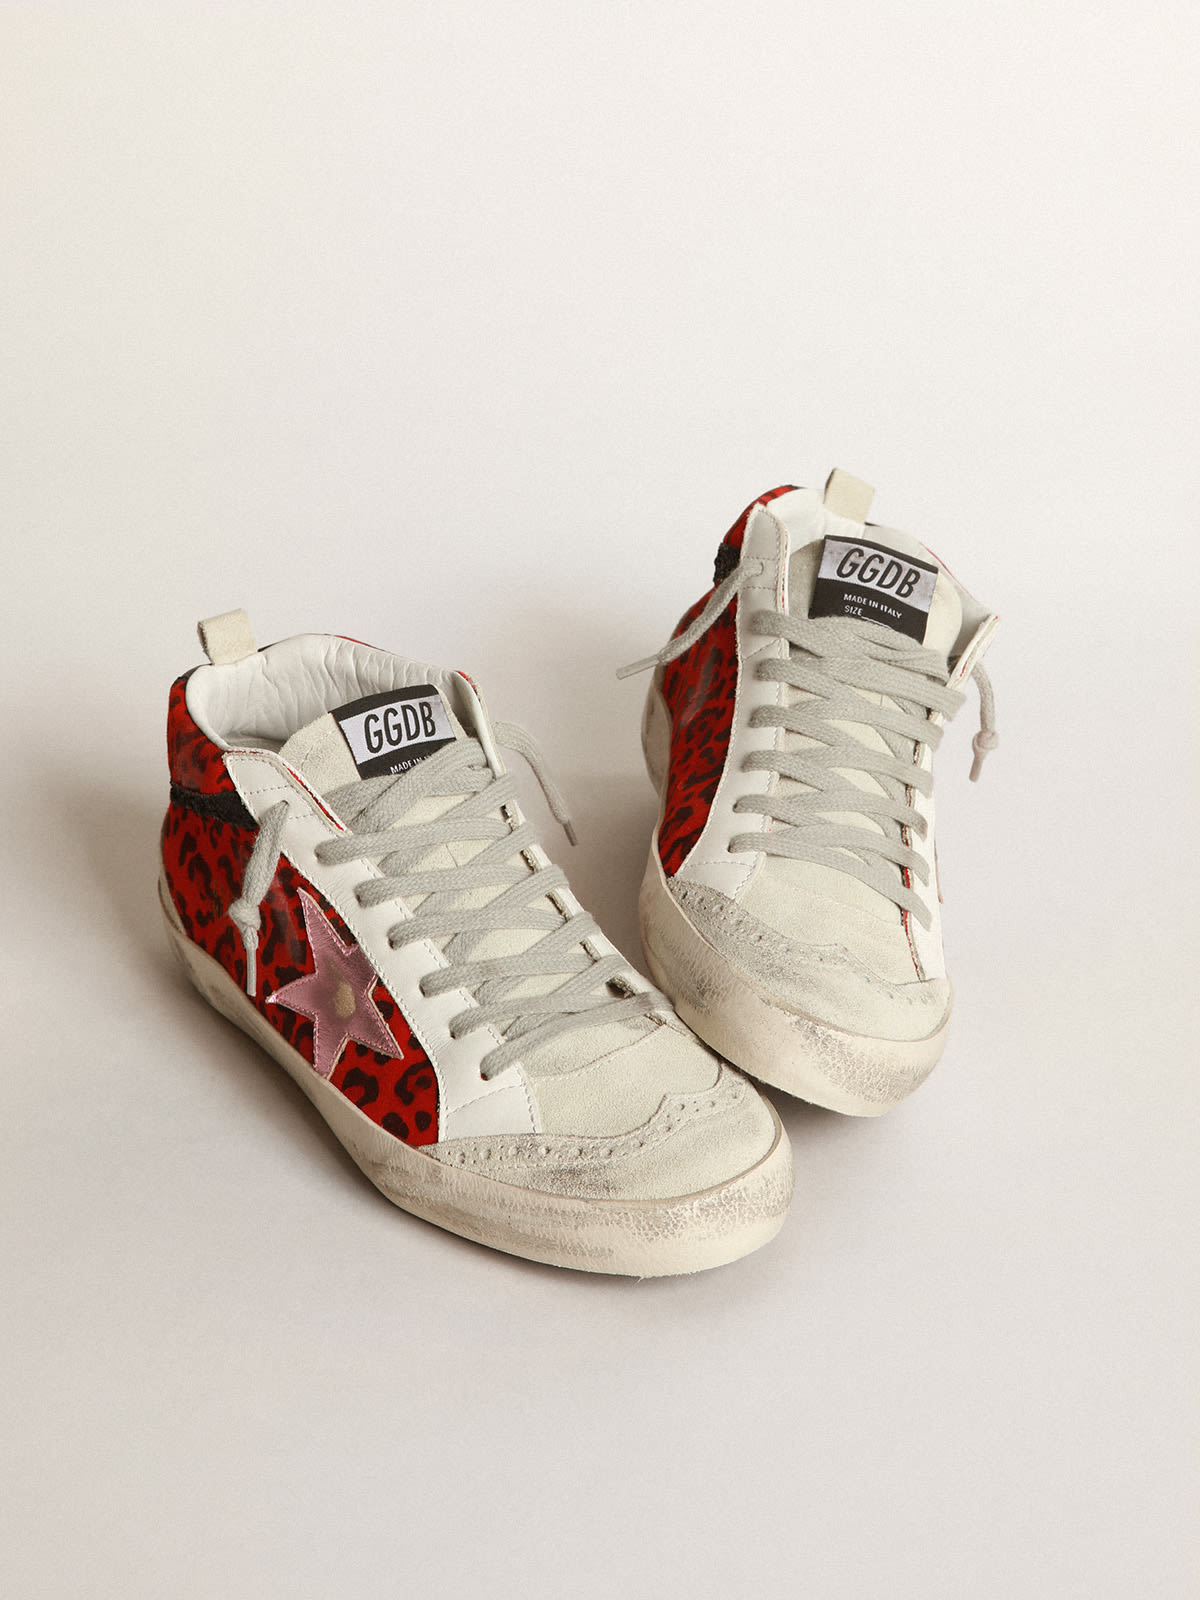 Golden Goose - Mid Star sneakers in red leopard-print suede with pink laminated leather star and black glitter flash in 